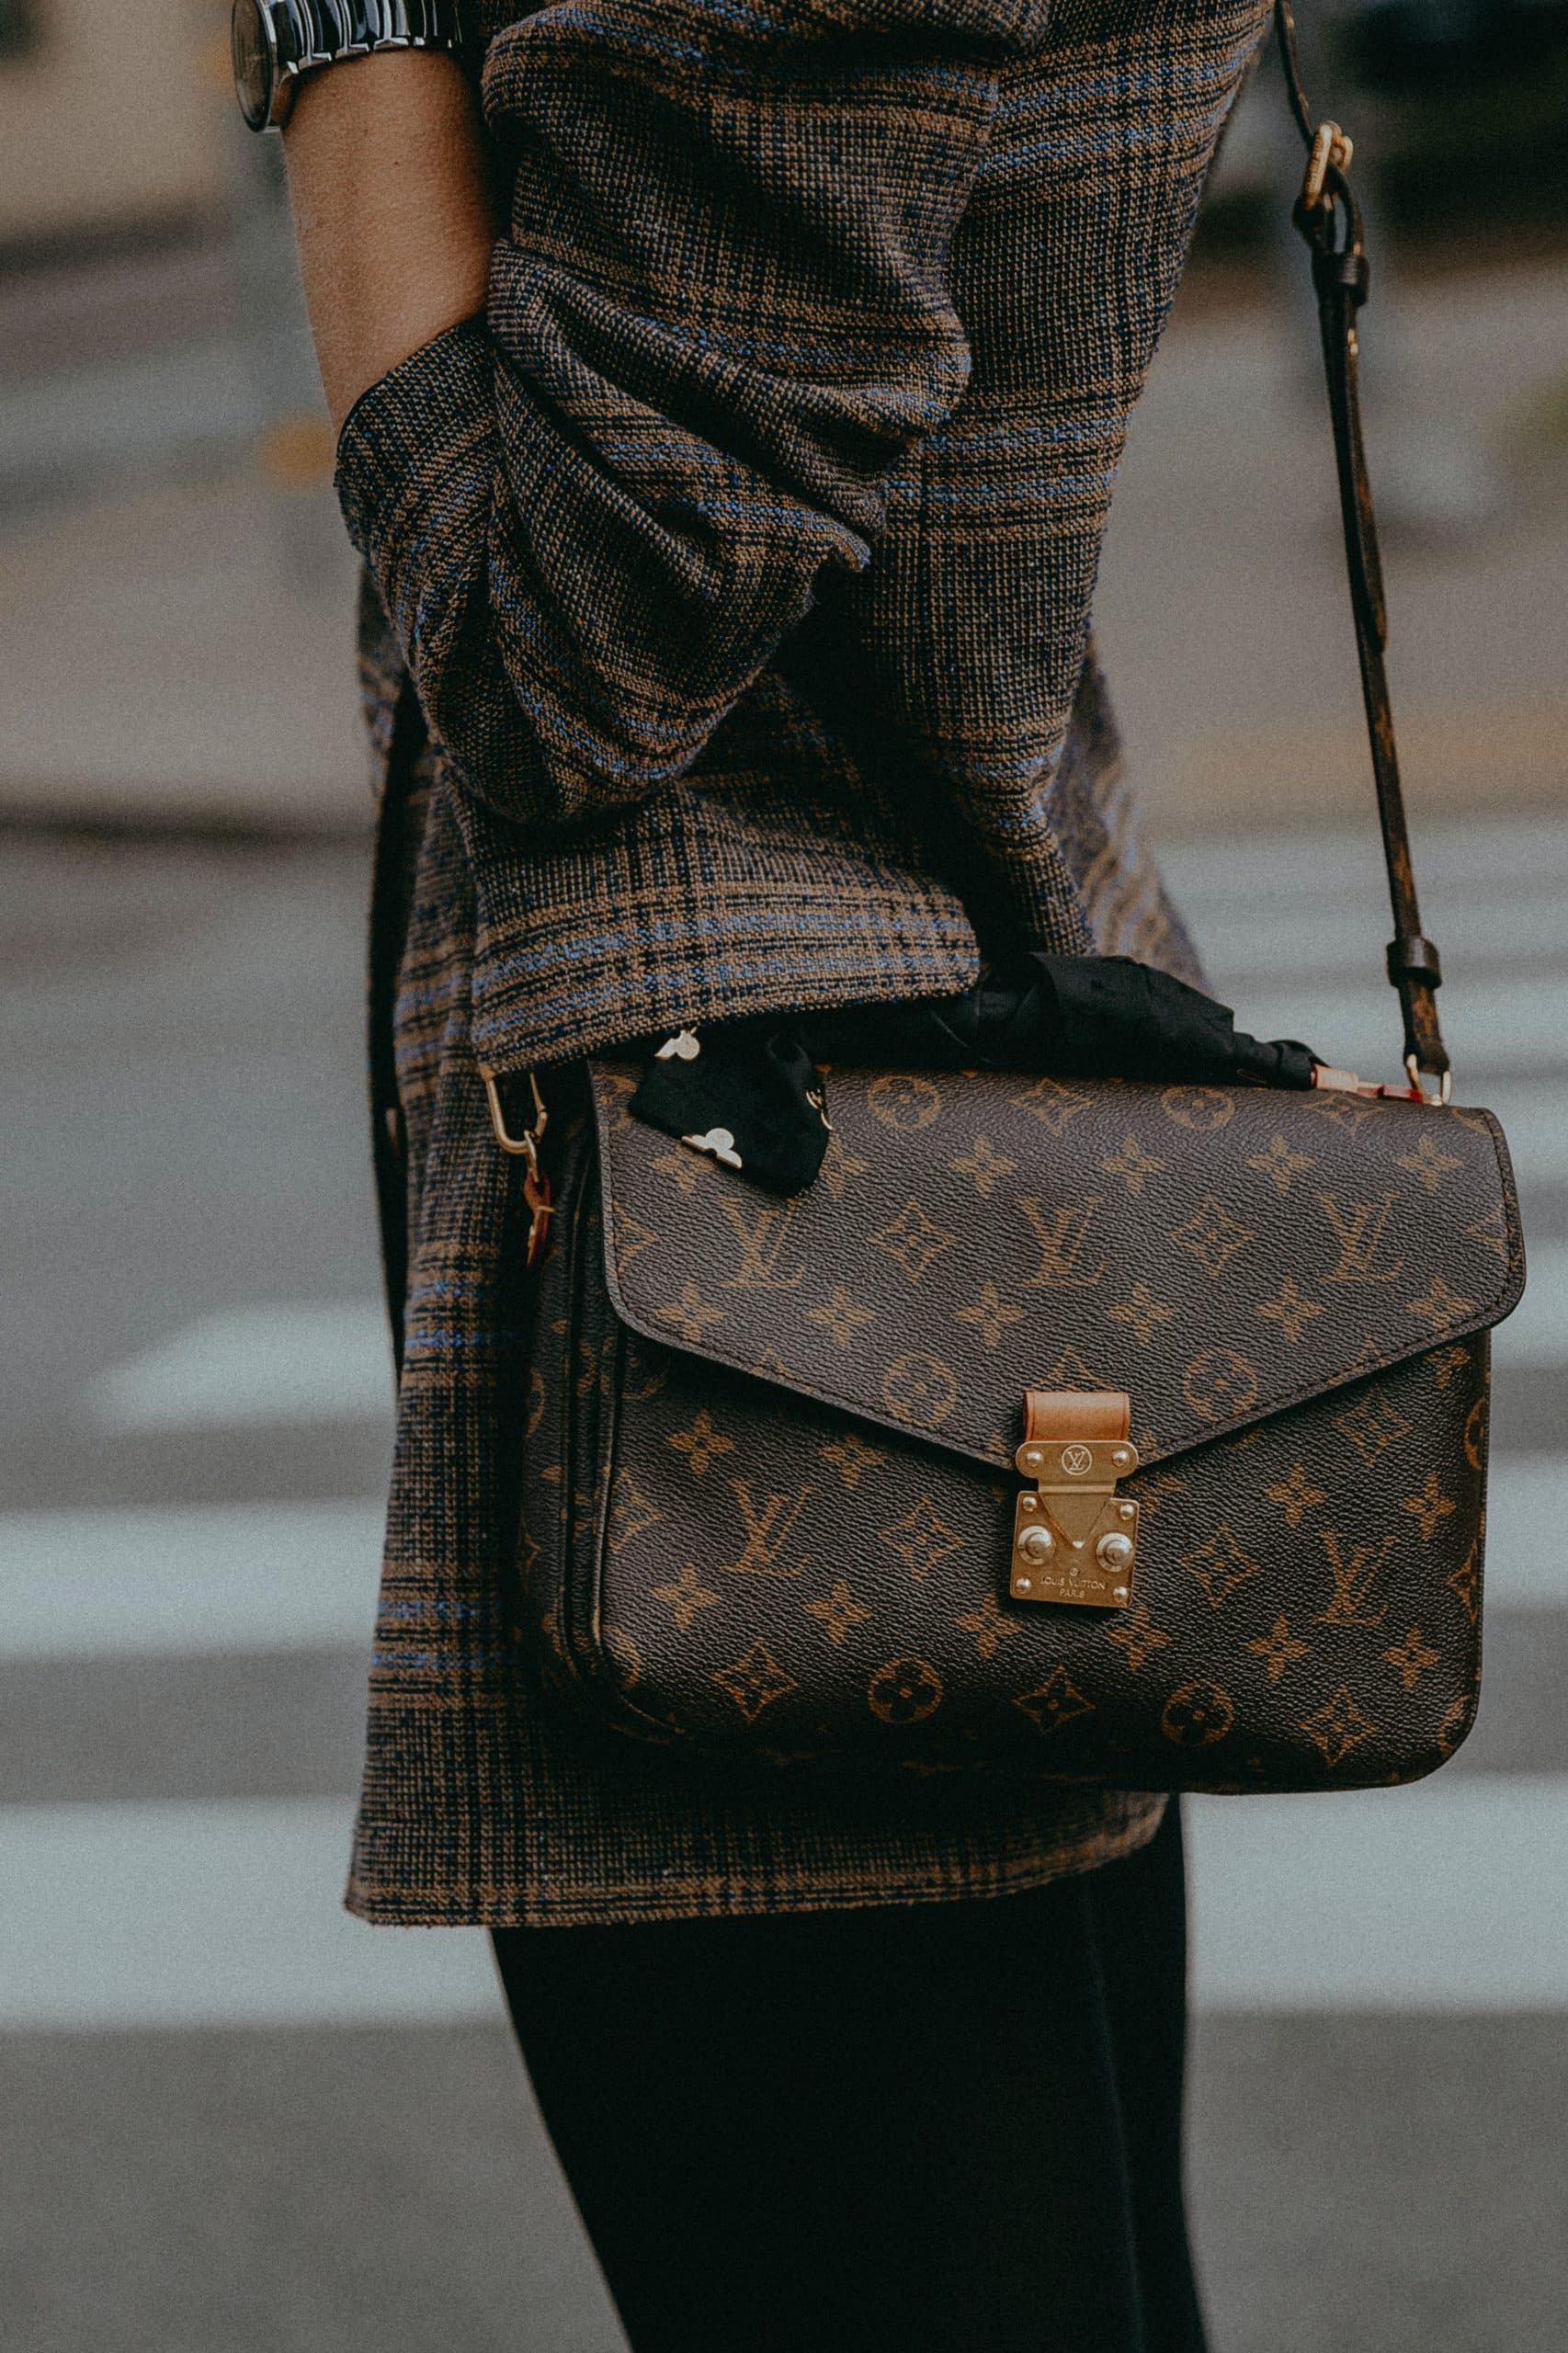 Louis Vuitton is the world’s most valuable luxury fashion brand